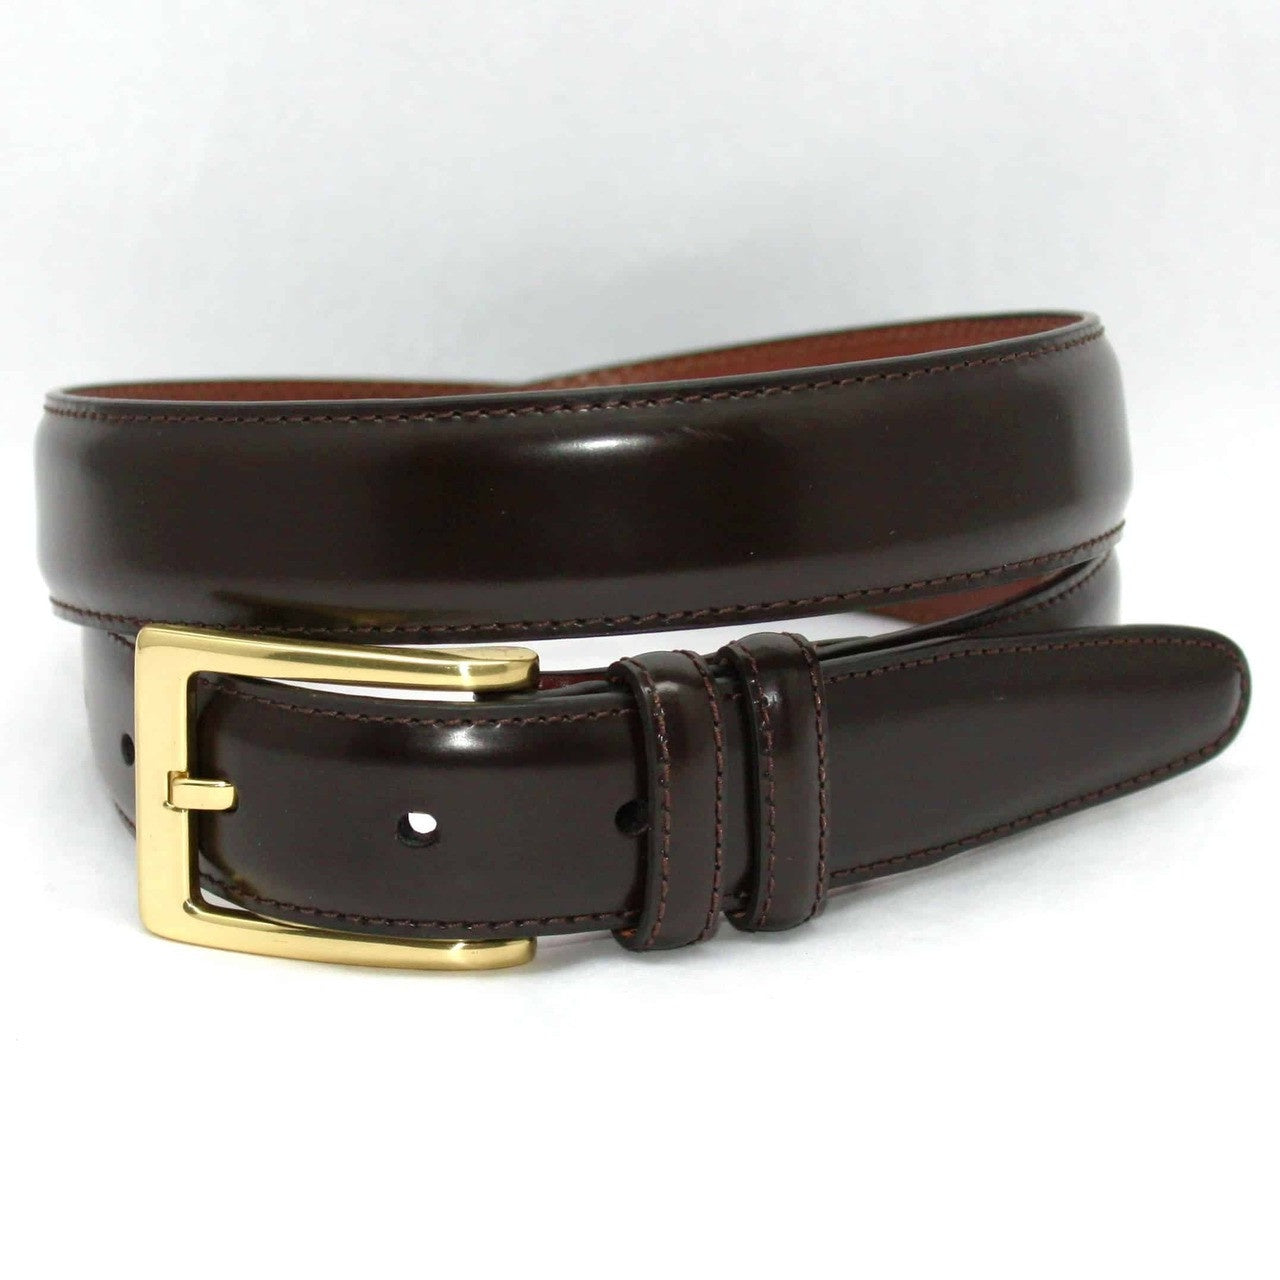 Torino Belts Antigua Leather Belt in Brown-Extra Long Sizes